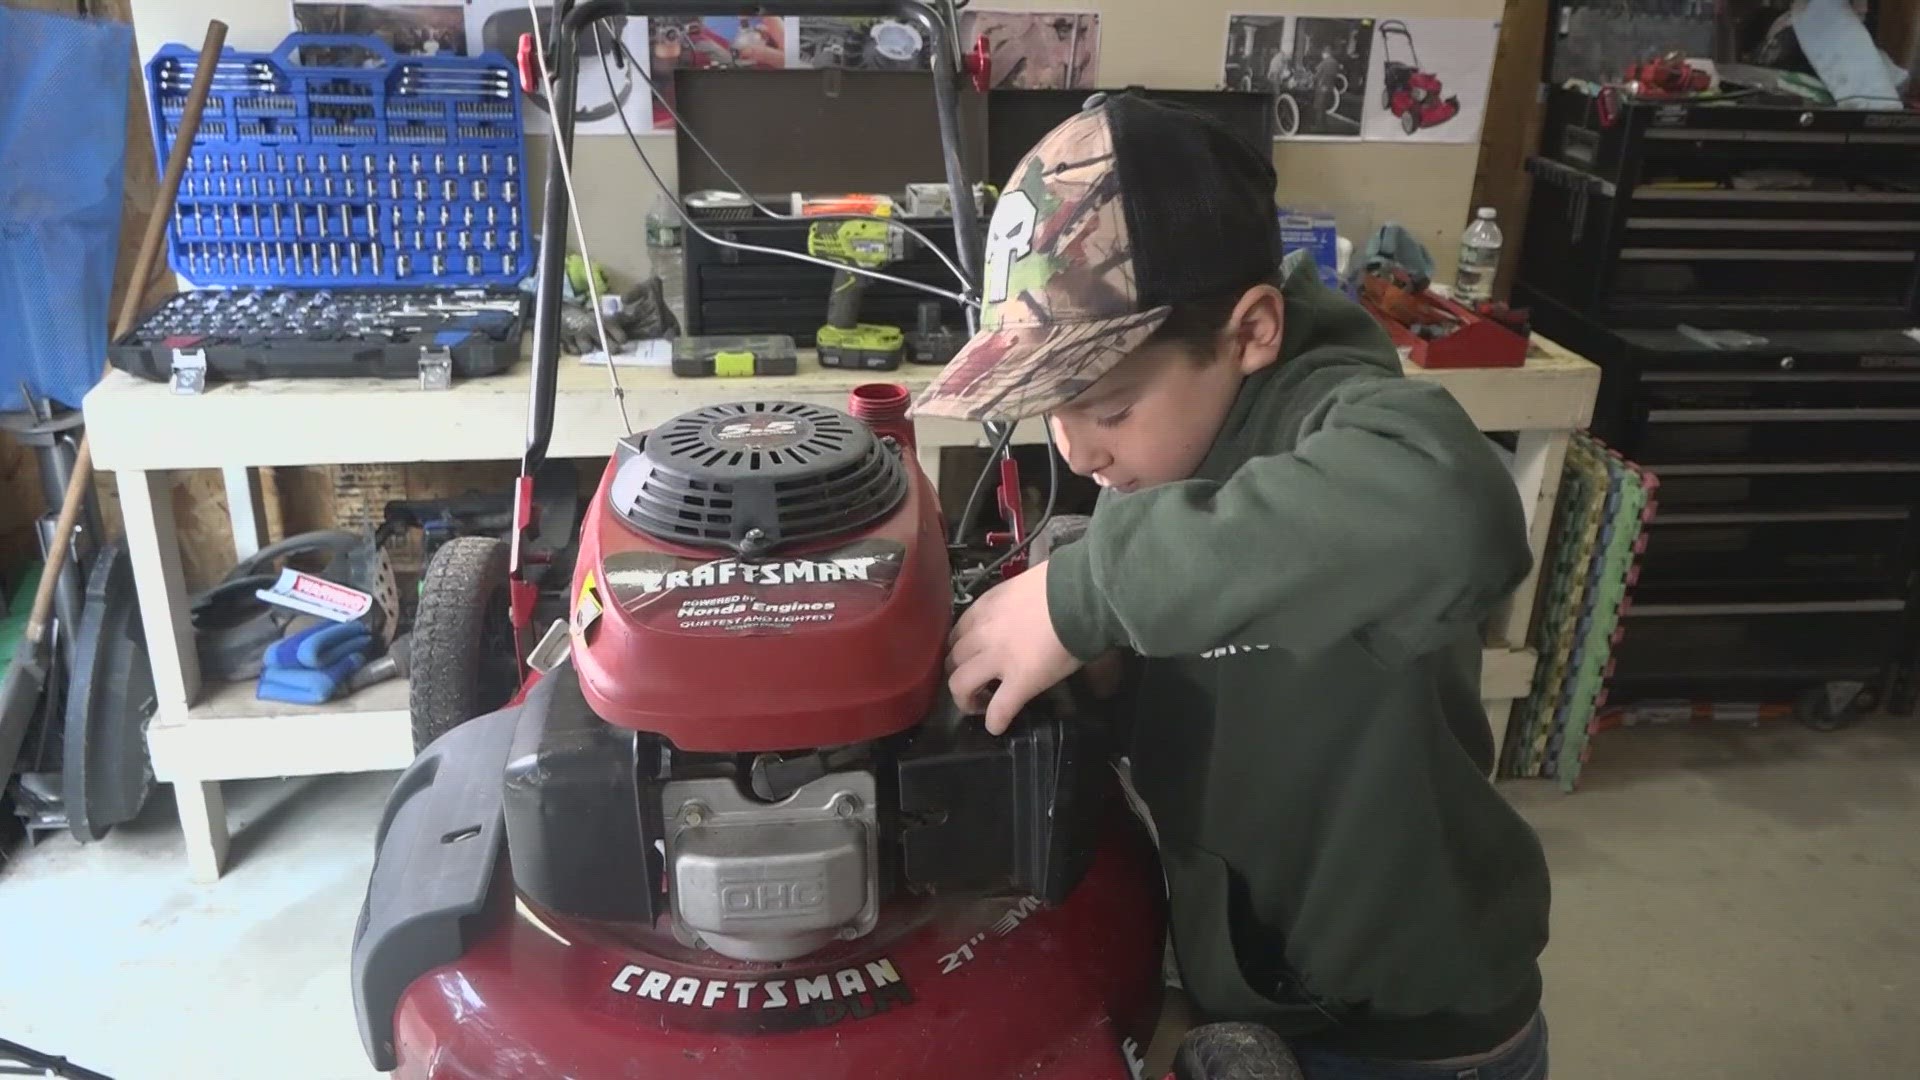 Earlier this year, he started watching and asking questions while his father and grandfather fixed their own broken machines. Now, he's fixing them himself.